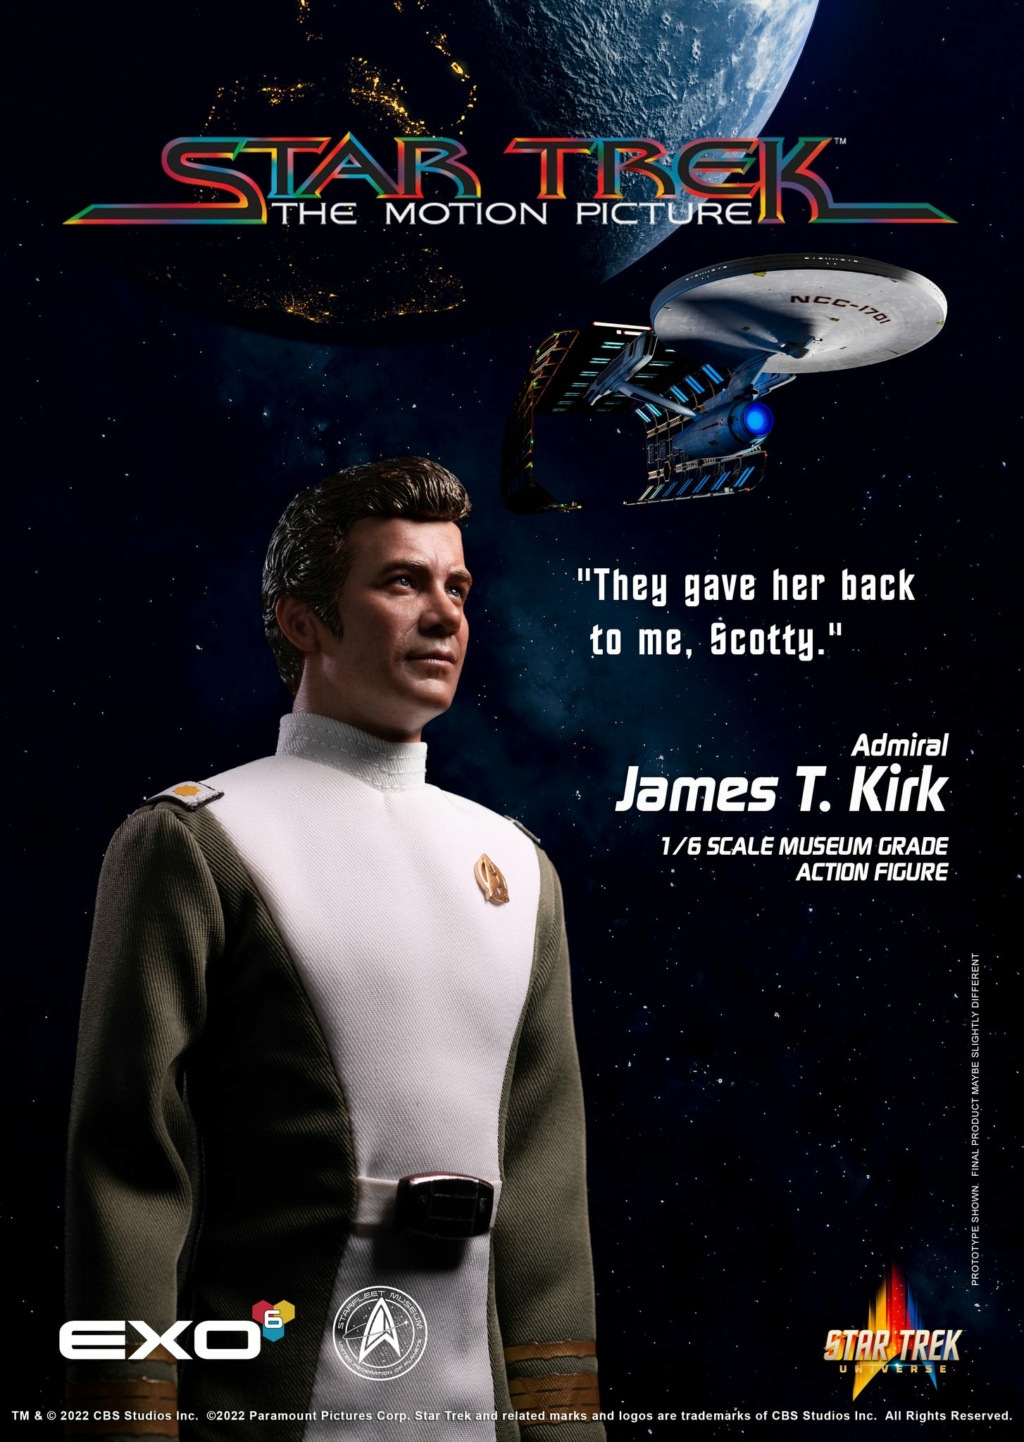 AdmiralJamesTKirk - NEW PRODUCT: EXO-6: STAR TREK: THE MOTION PICTURE: ADMIRAL JAMES T. KIRK 1/6 scale figure (LIMITED & IMMEDIATE AVAILABILITY RELEASE) 6637